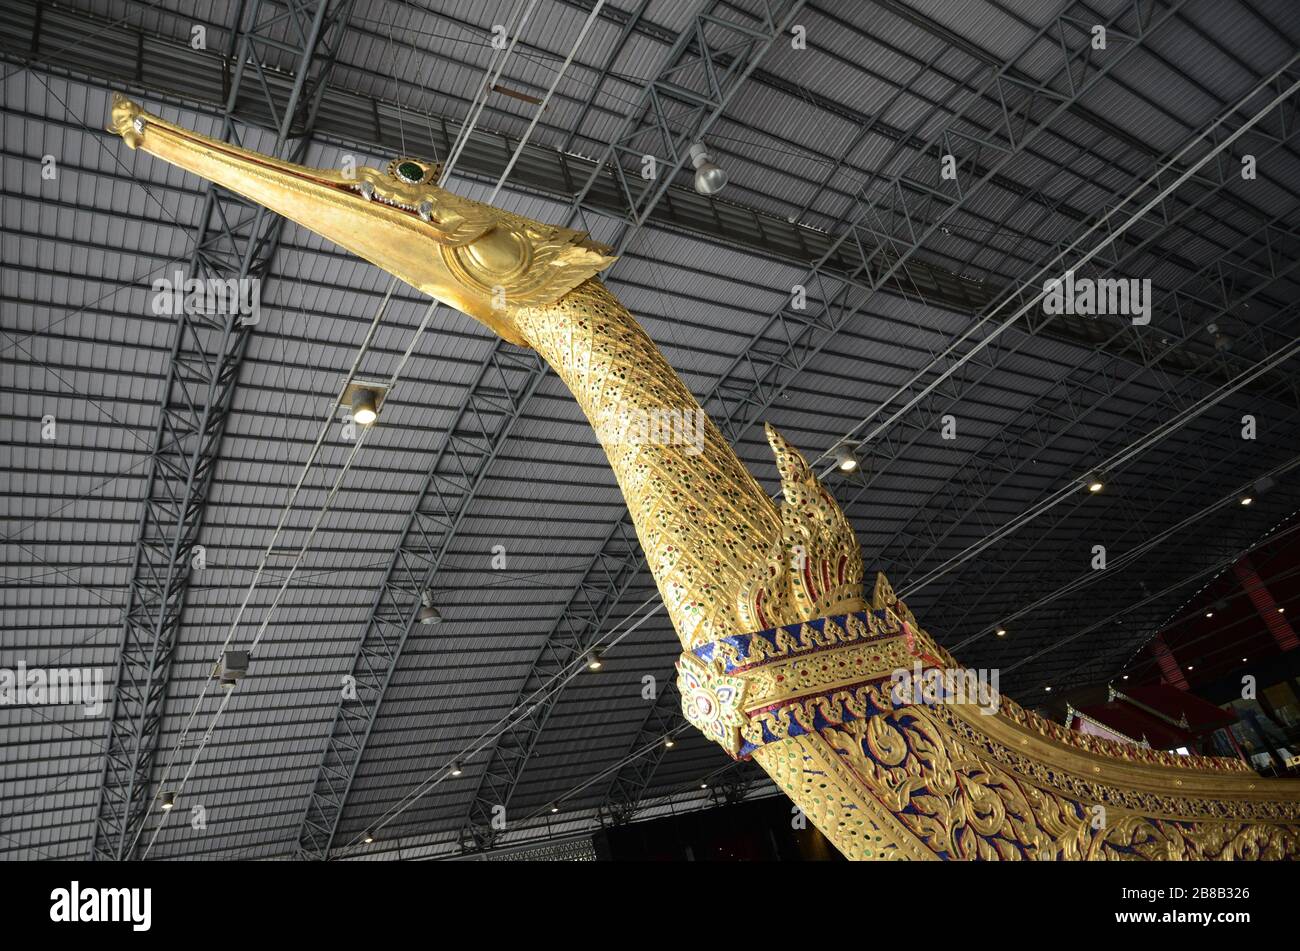 Golden statue of an animal decorated with multiple colors under the roof of a building Stock Photo